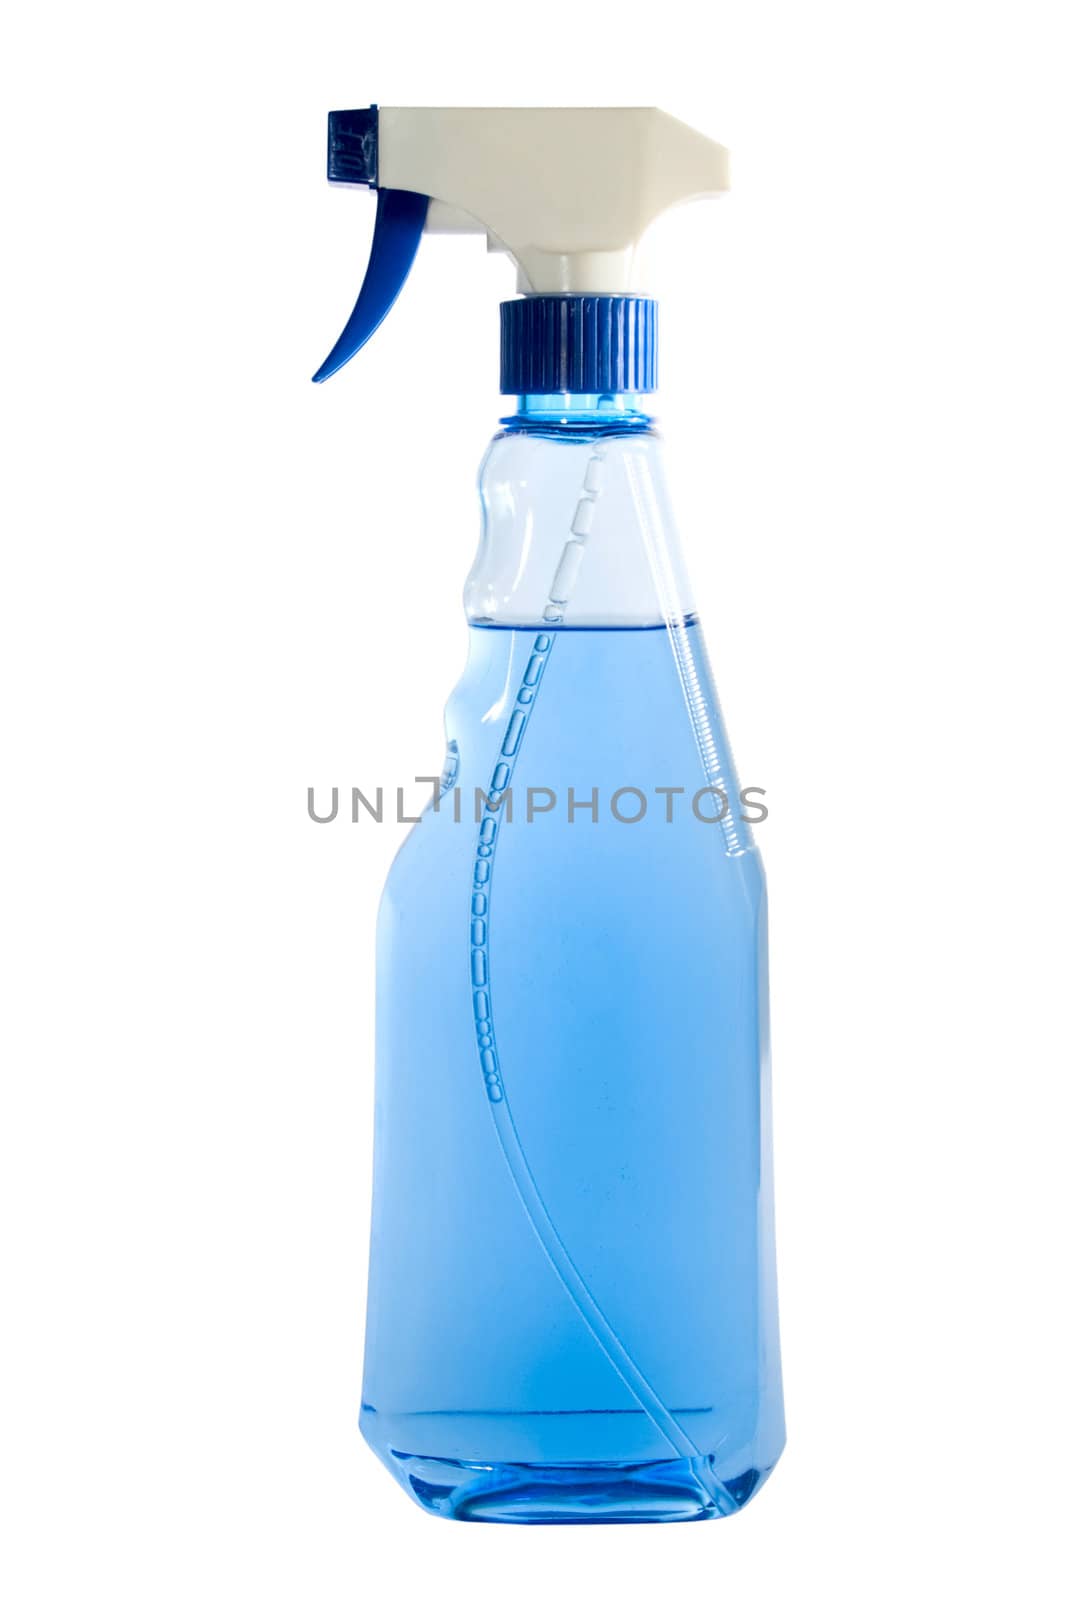 abstergent in plastic bottle isolated on white background